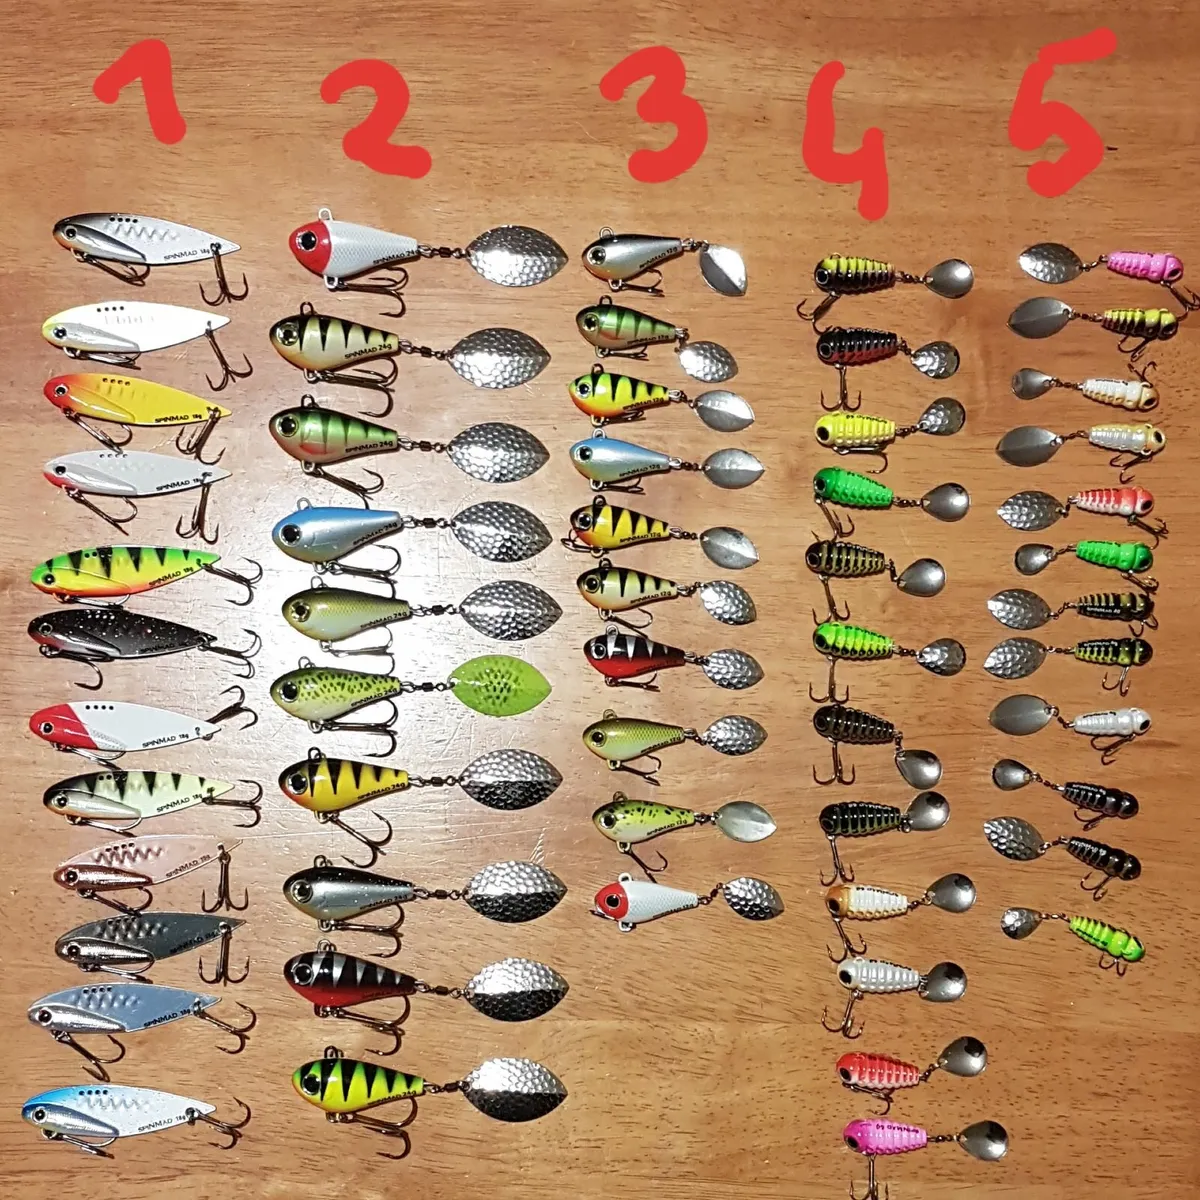 New soft and hard fishing lures... - Image 1